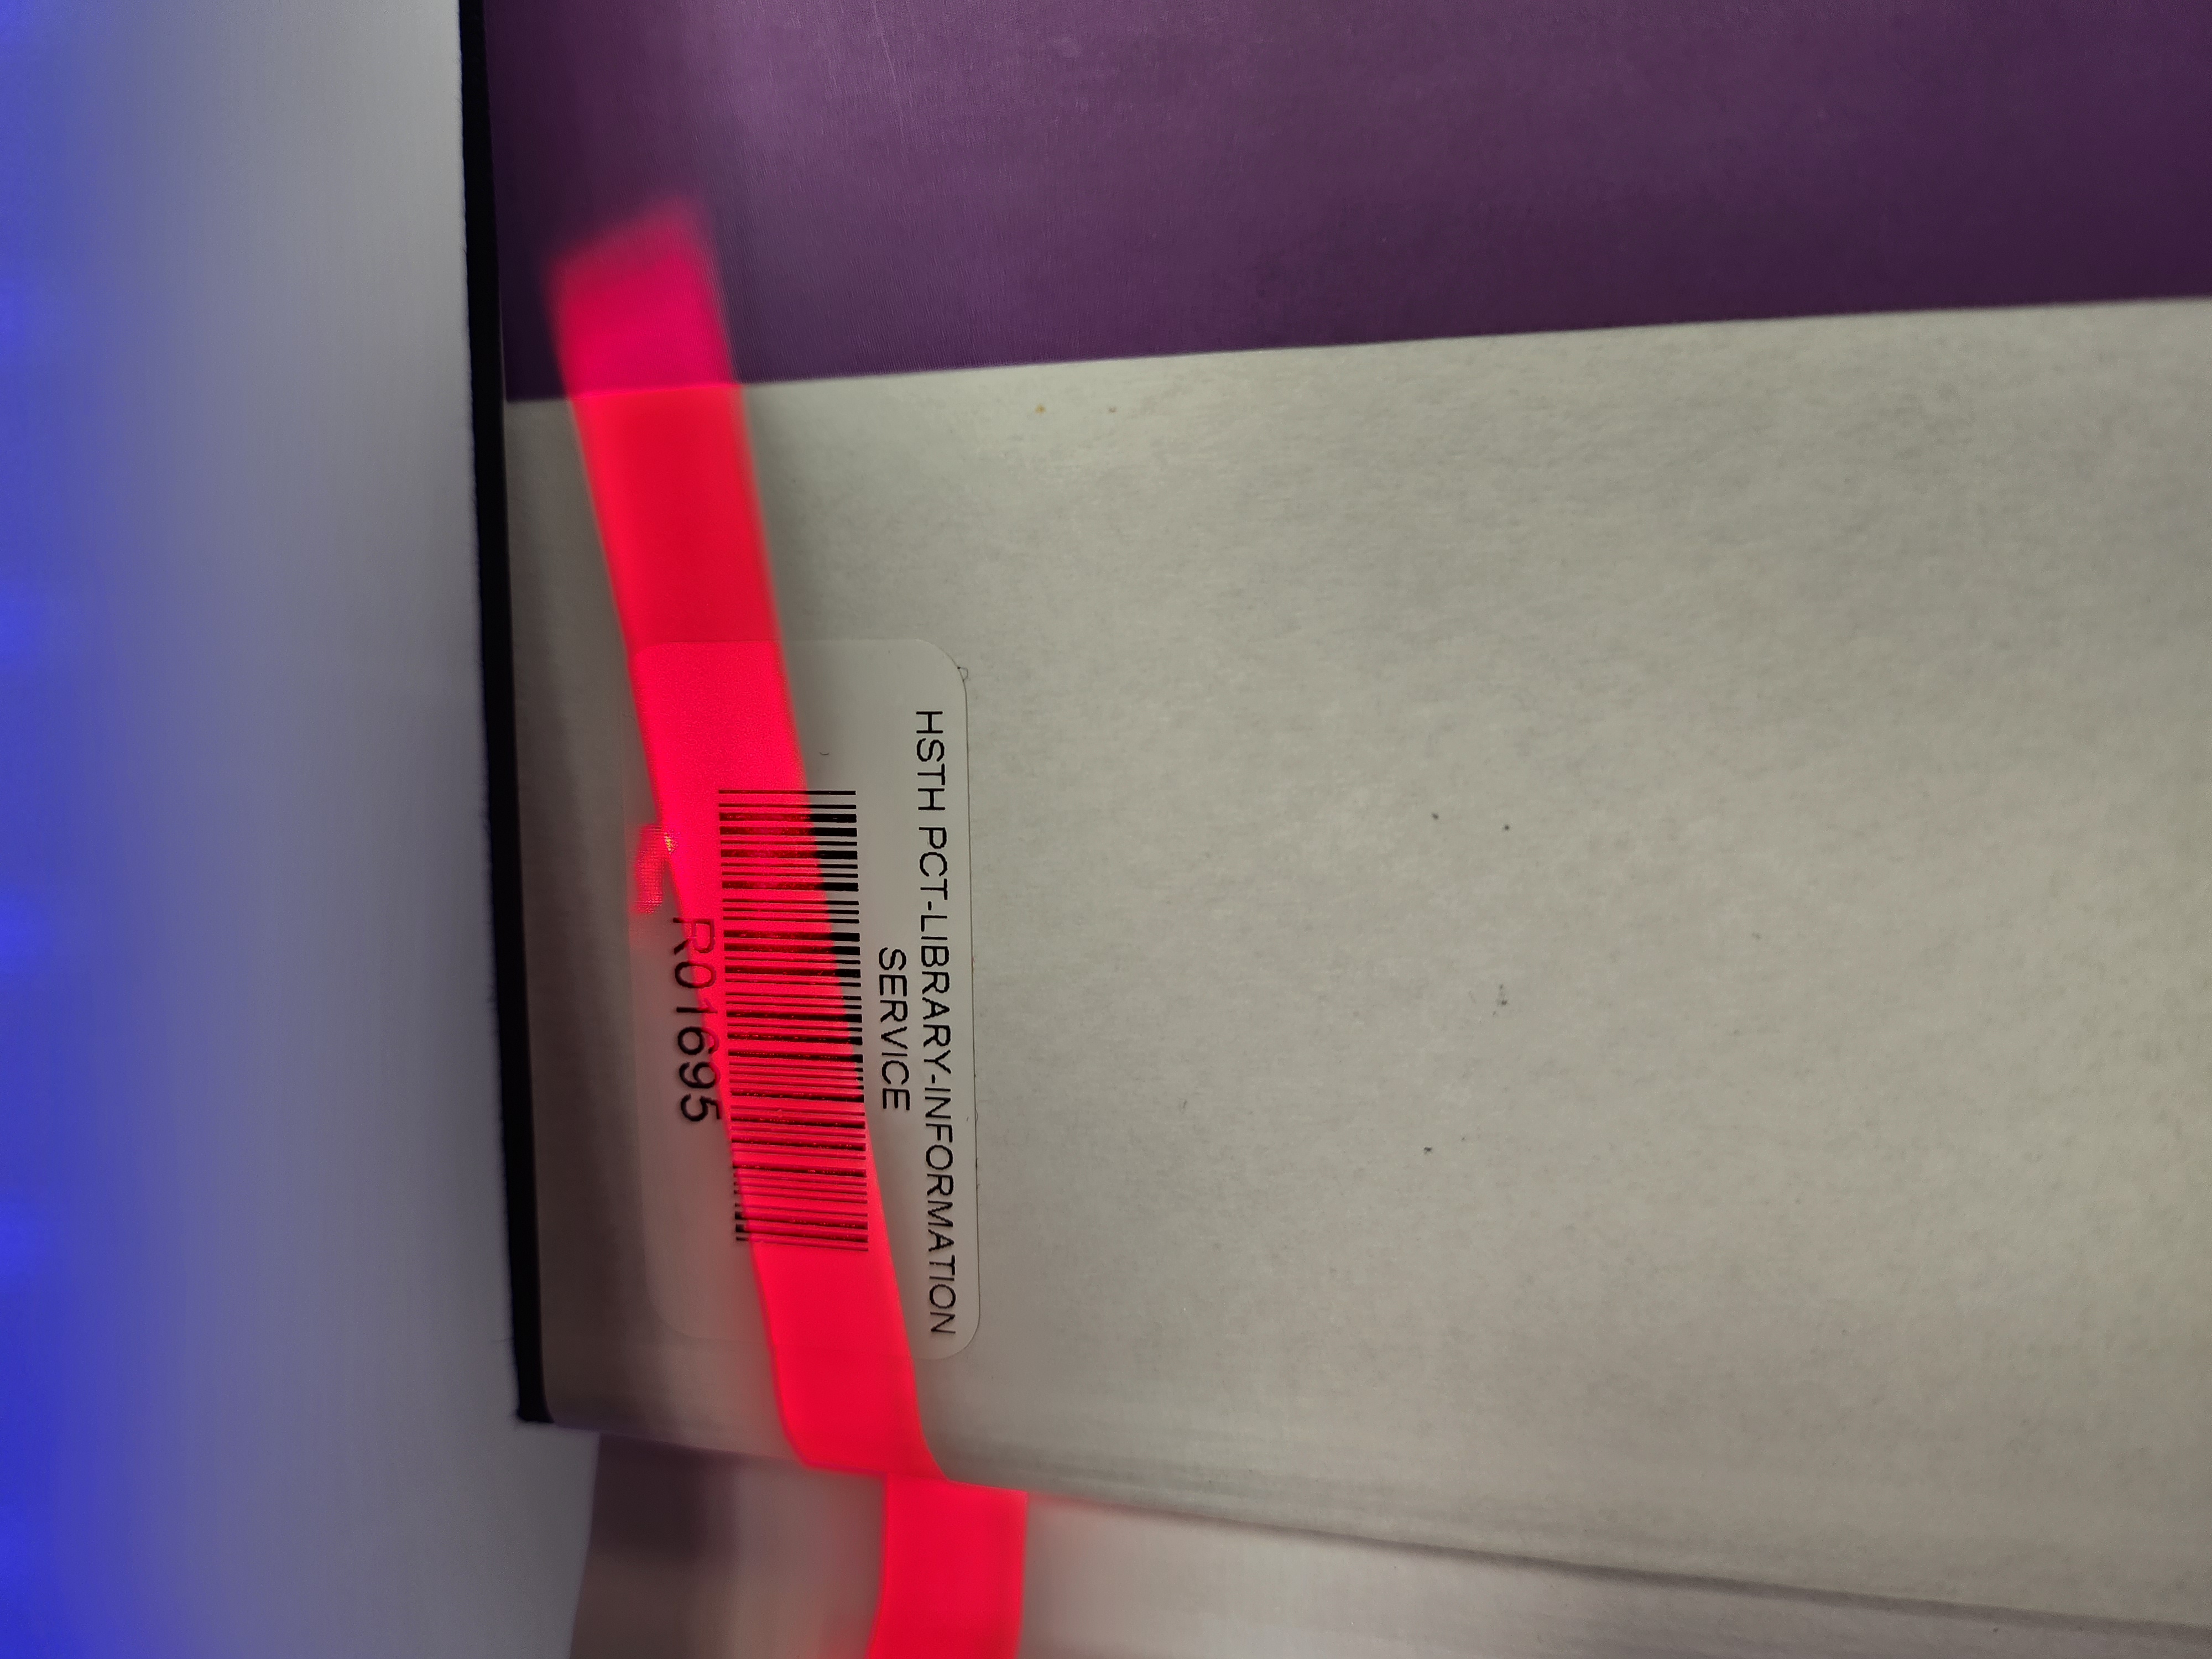 Image of a barcode being read